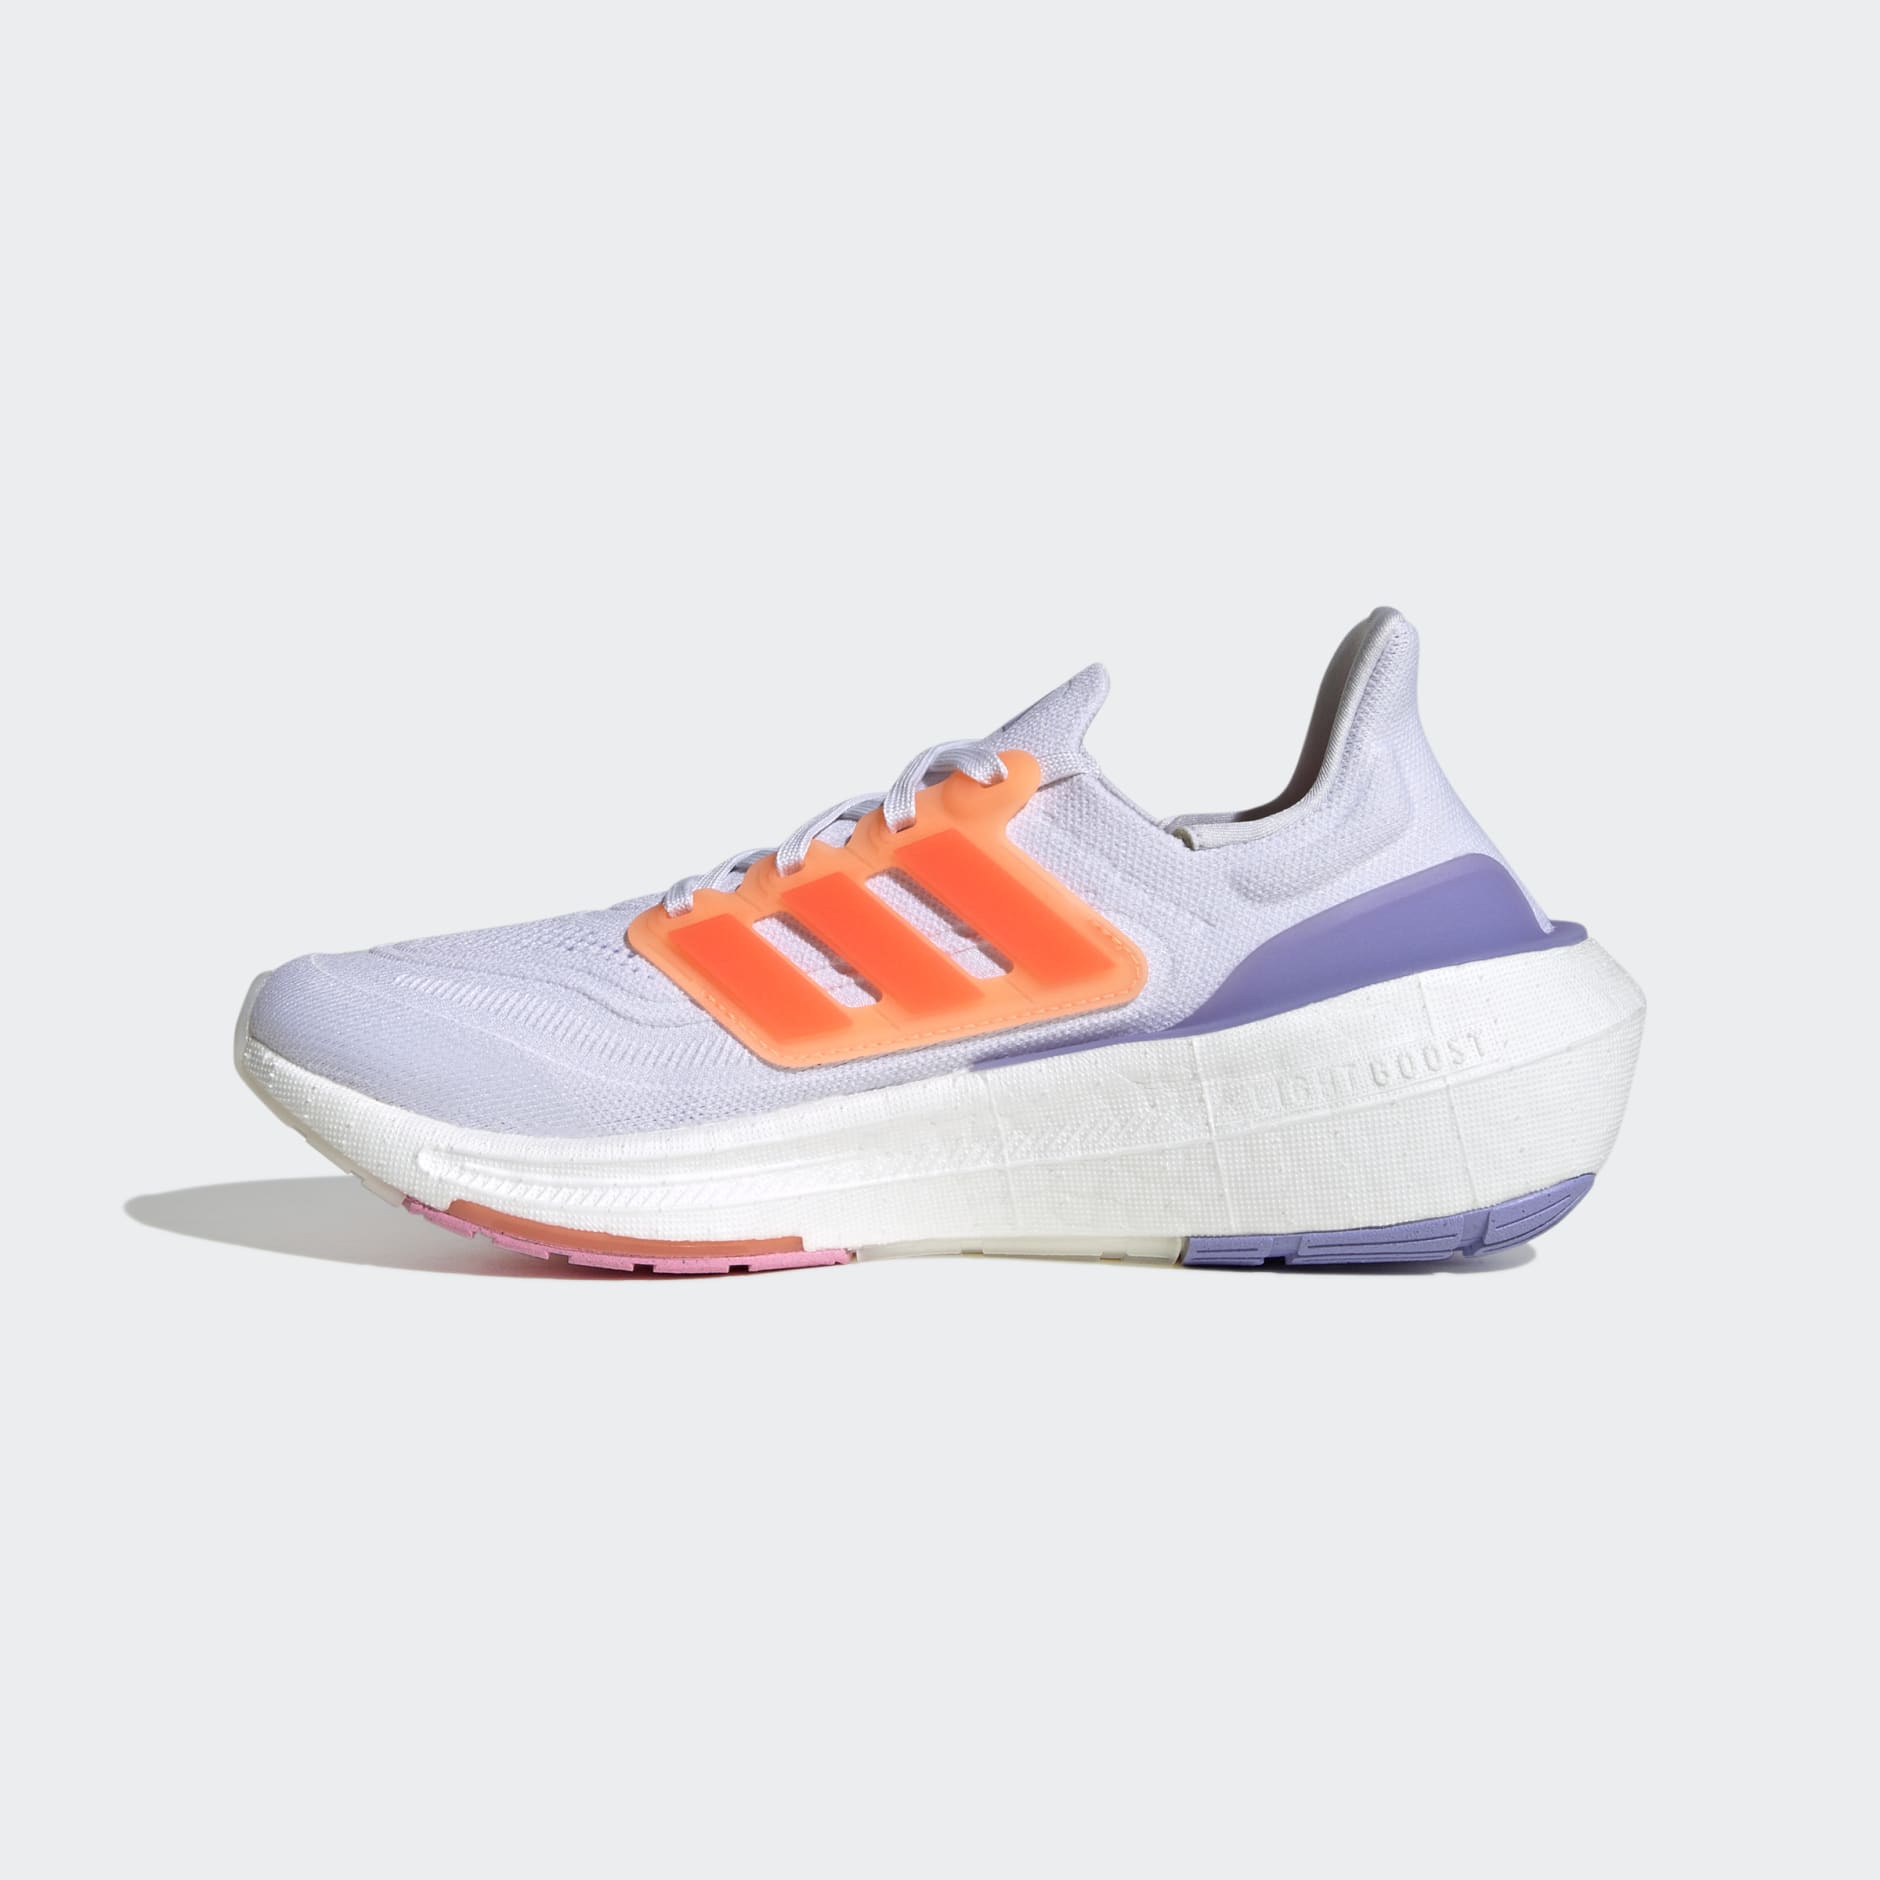 adidas Ultraboost Light Shoes - White | adidas GH